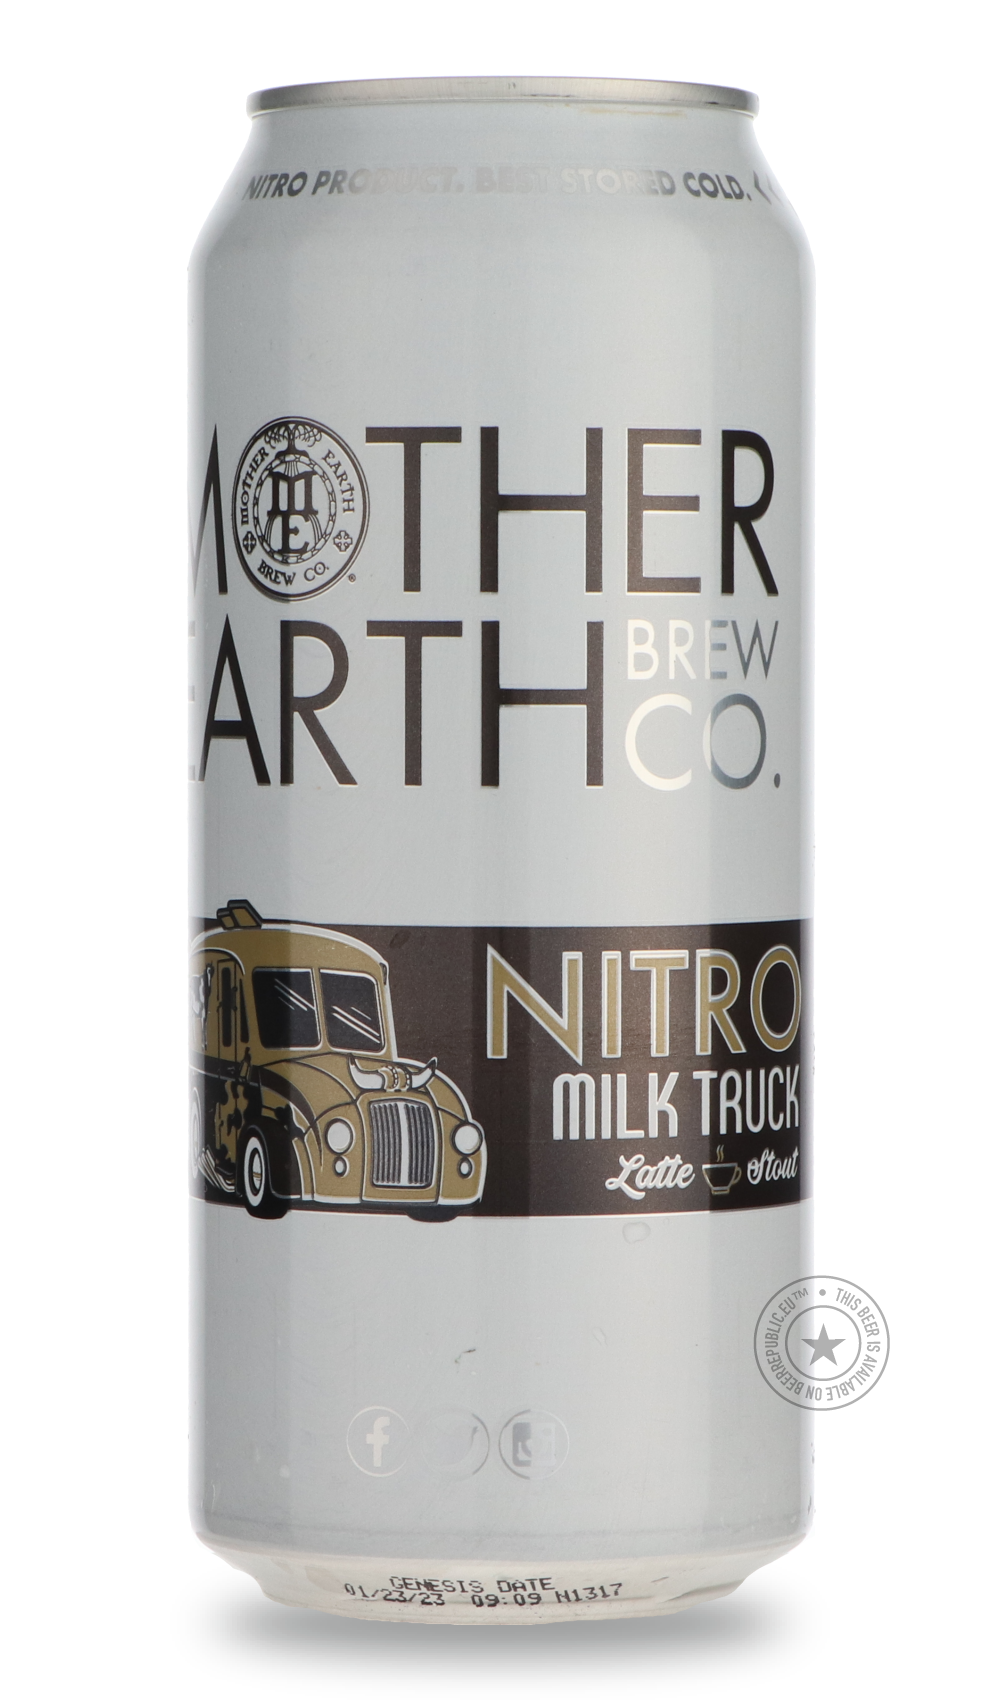 -Mother Earth- Nitro Milk Truck-Stout & Porter- Only @ Beer Republic - The best online beer store for American & Canadian craft beer - Buy beer online from the USA and Canada - Bier online kopen - Amerikaans bier kopen - Craft beer store - Craft beer kopen - Amerikanisch bier kaufen - Bier online kaufen - Acheter biere online - IPA - Stout - Porter - New England IPA - Hazy IPA - Imperial Stout - Barrel Aged - Barrel Aged Imperial Stout - Brown - Dark beer - Blond - Blonde - Pilsner - Lager - Wheat - Weizen 